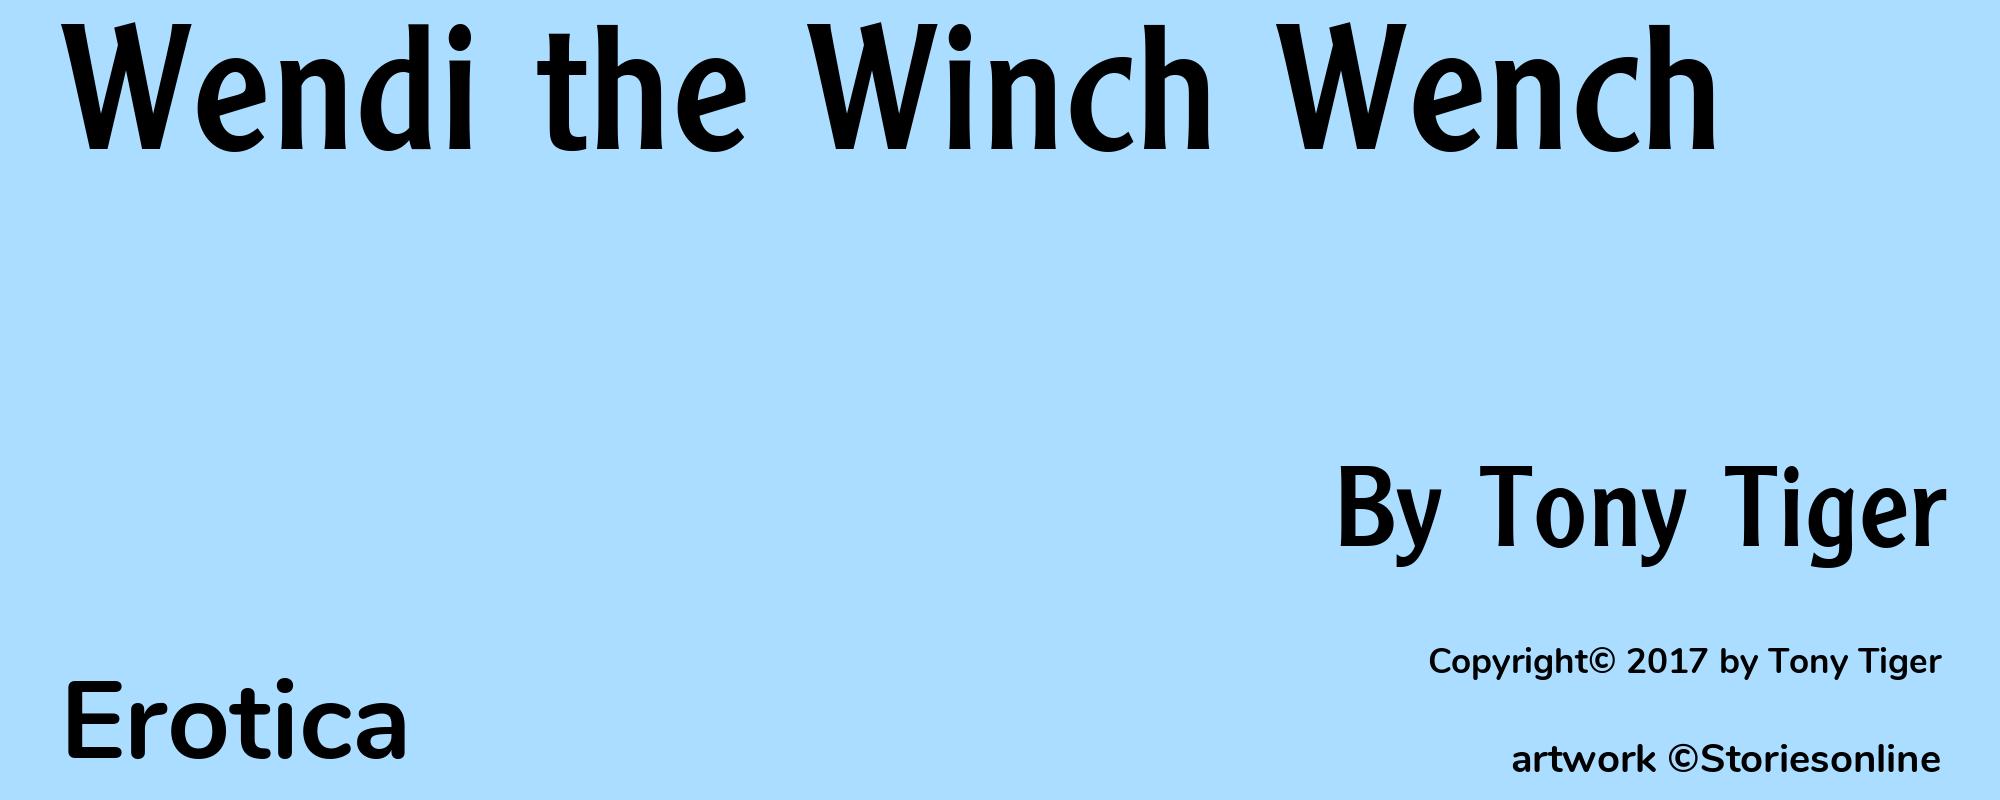 Wendi the Winch Wench - Cover